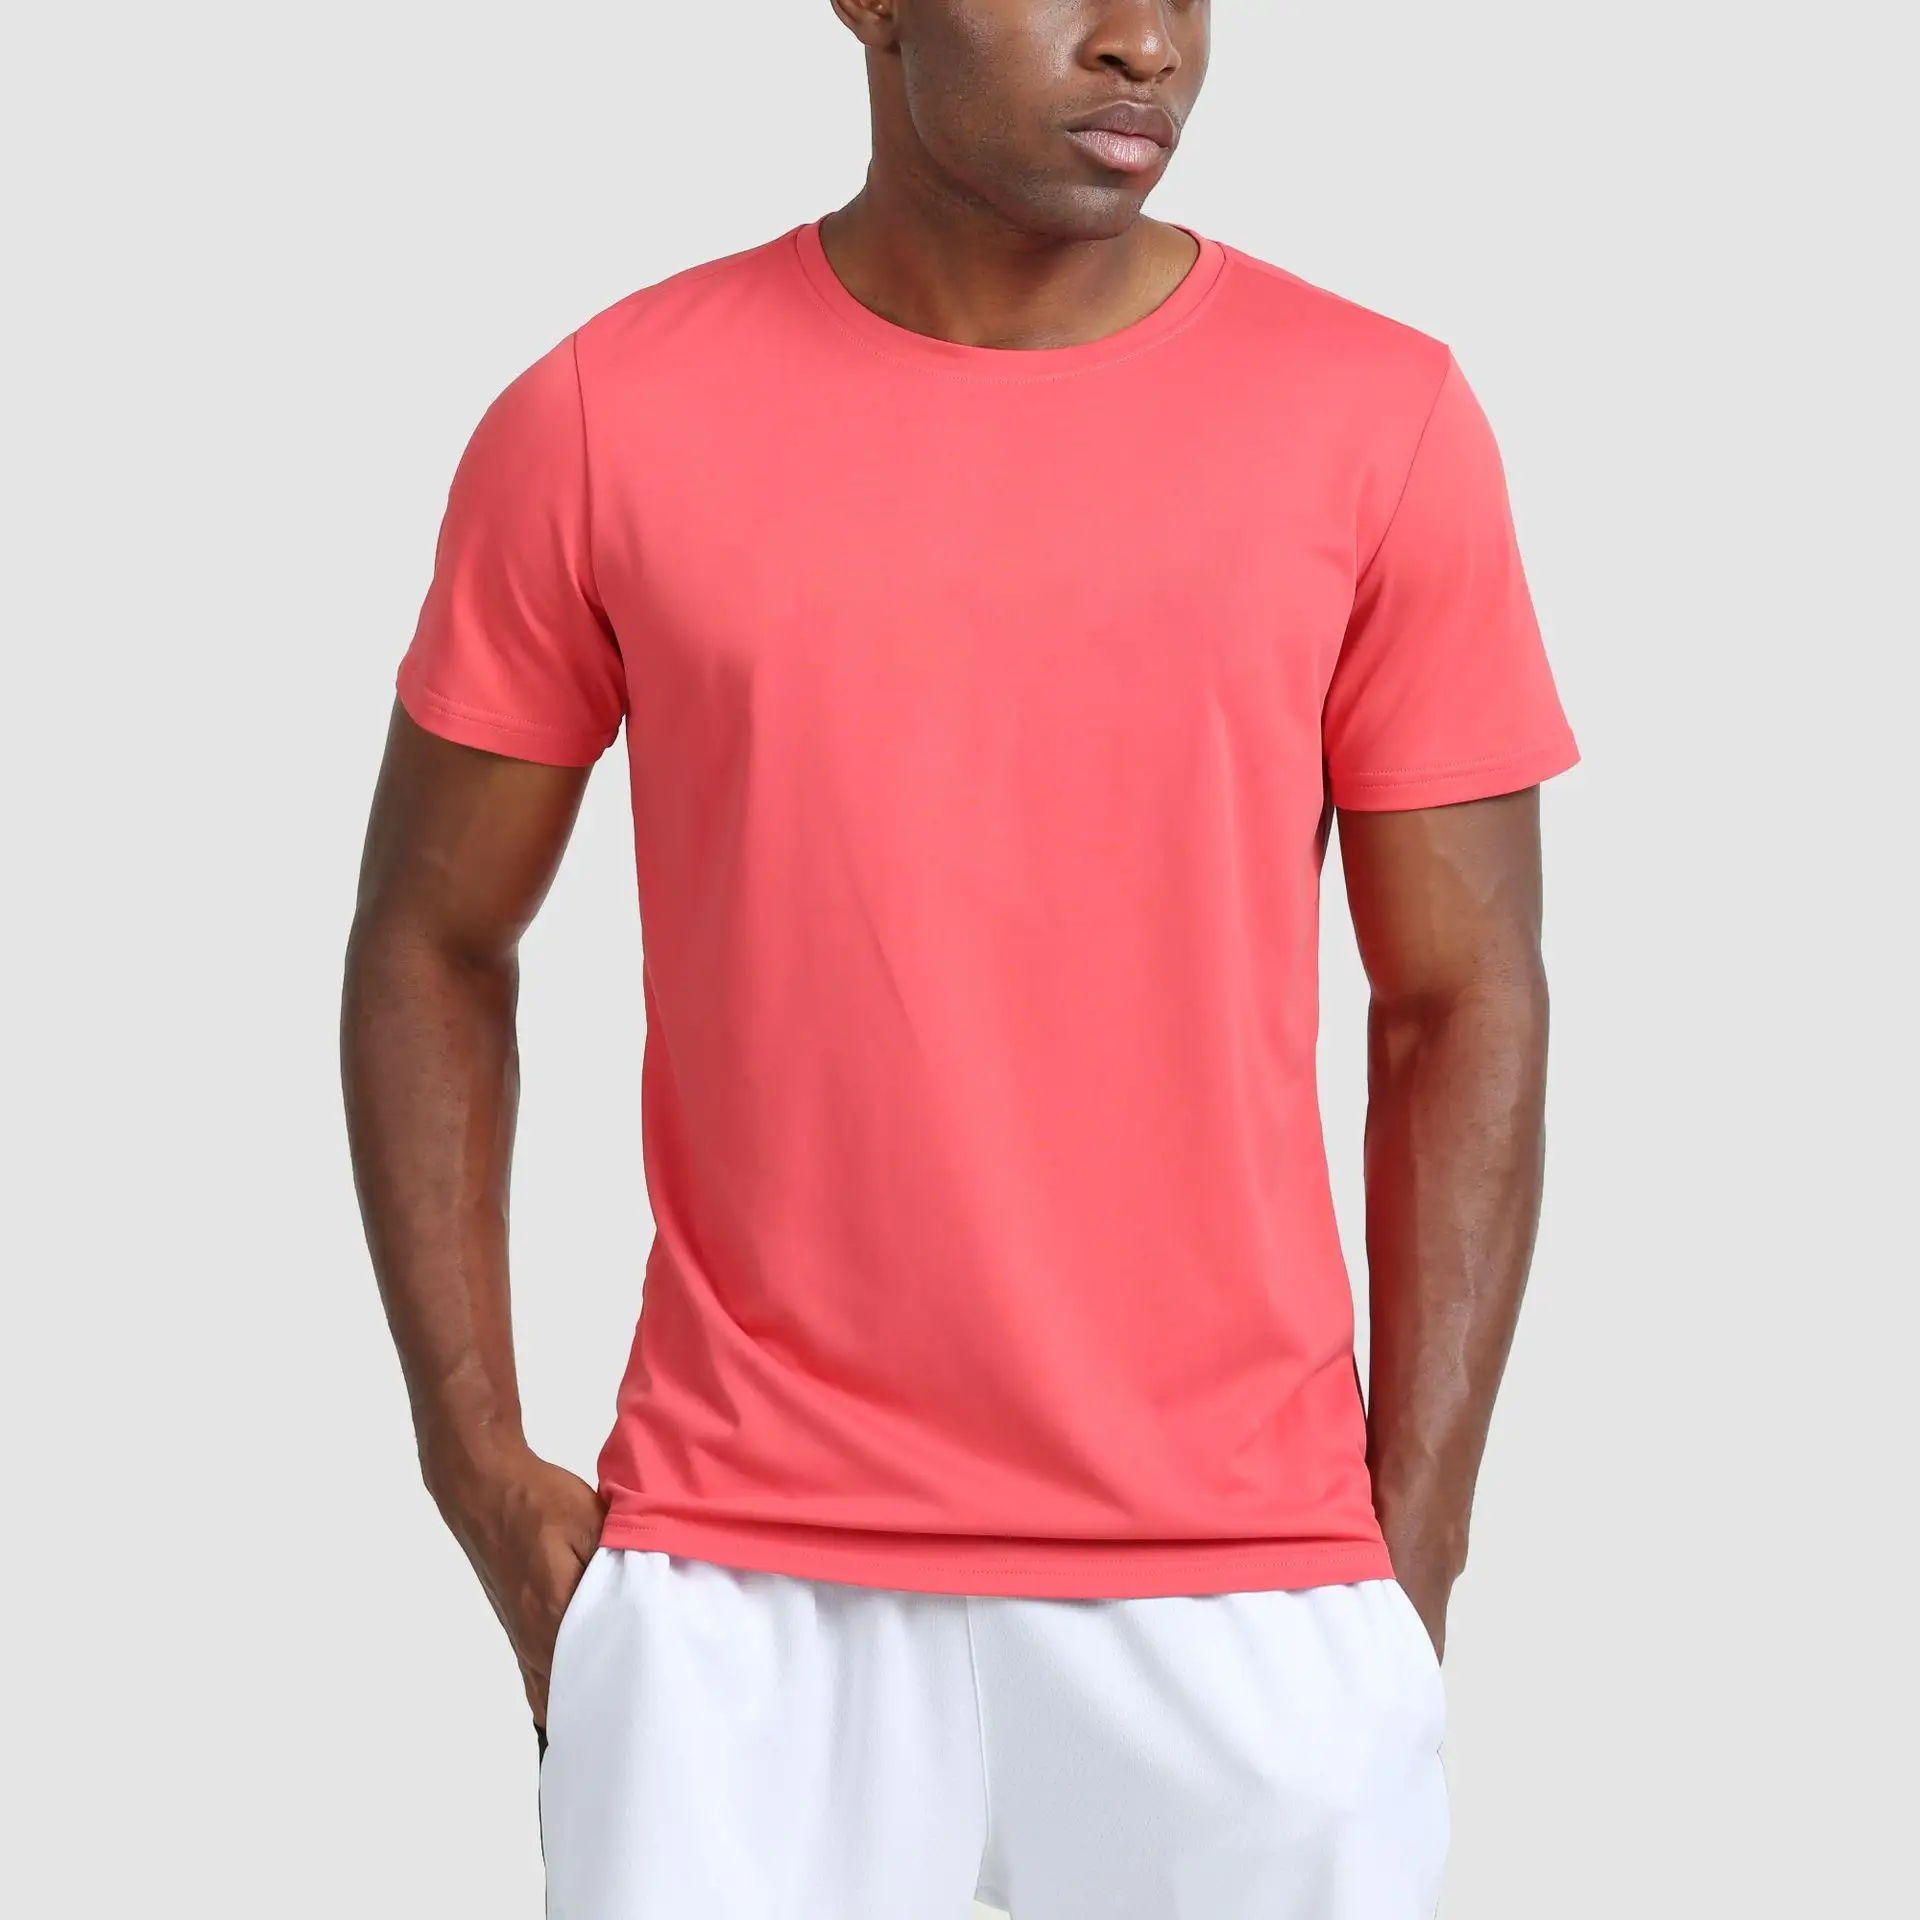 Outdoor Solid Color Quick Dry Fitness Sports T Shirt Tops For Men Summer Gym Short Sleeve Running Training Tshirt Tees